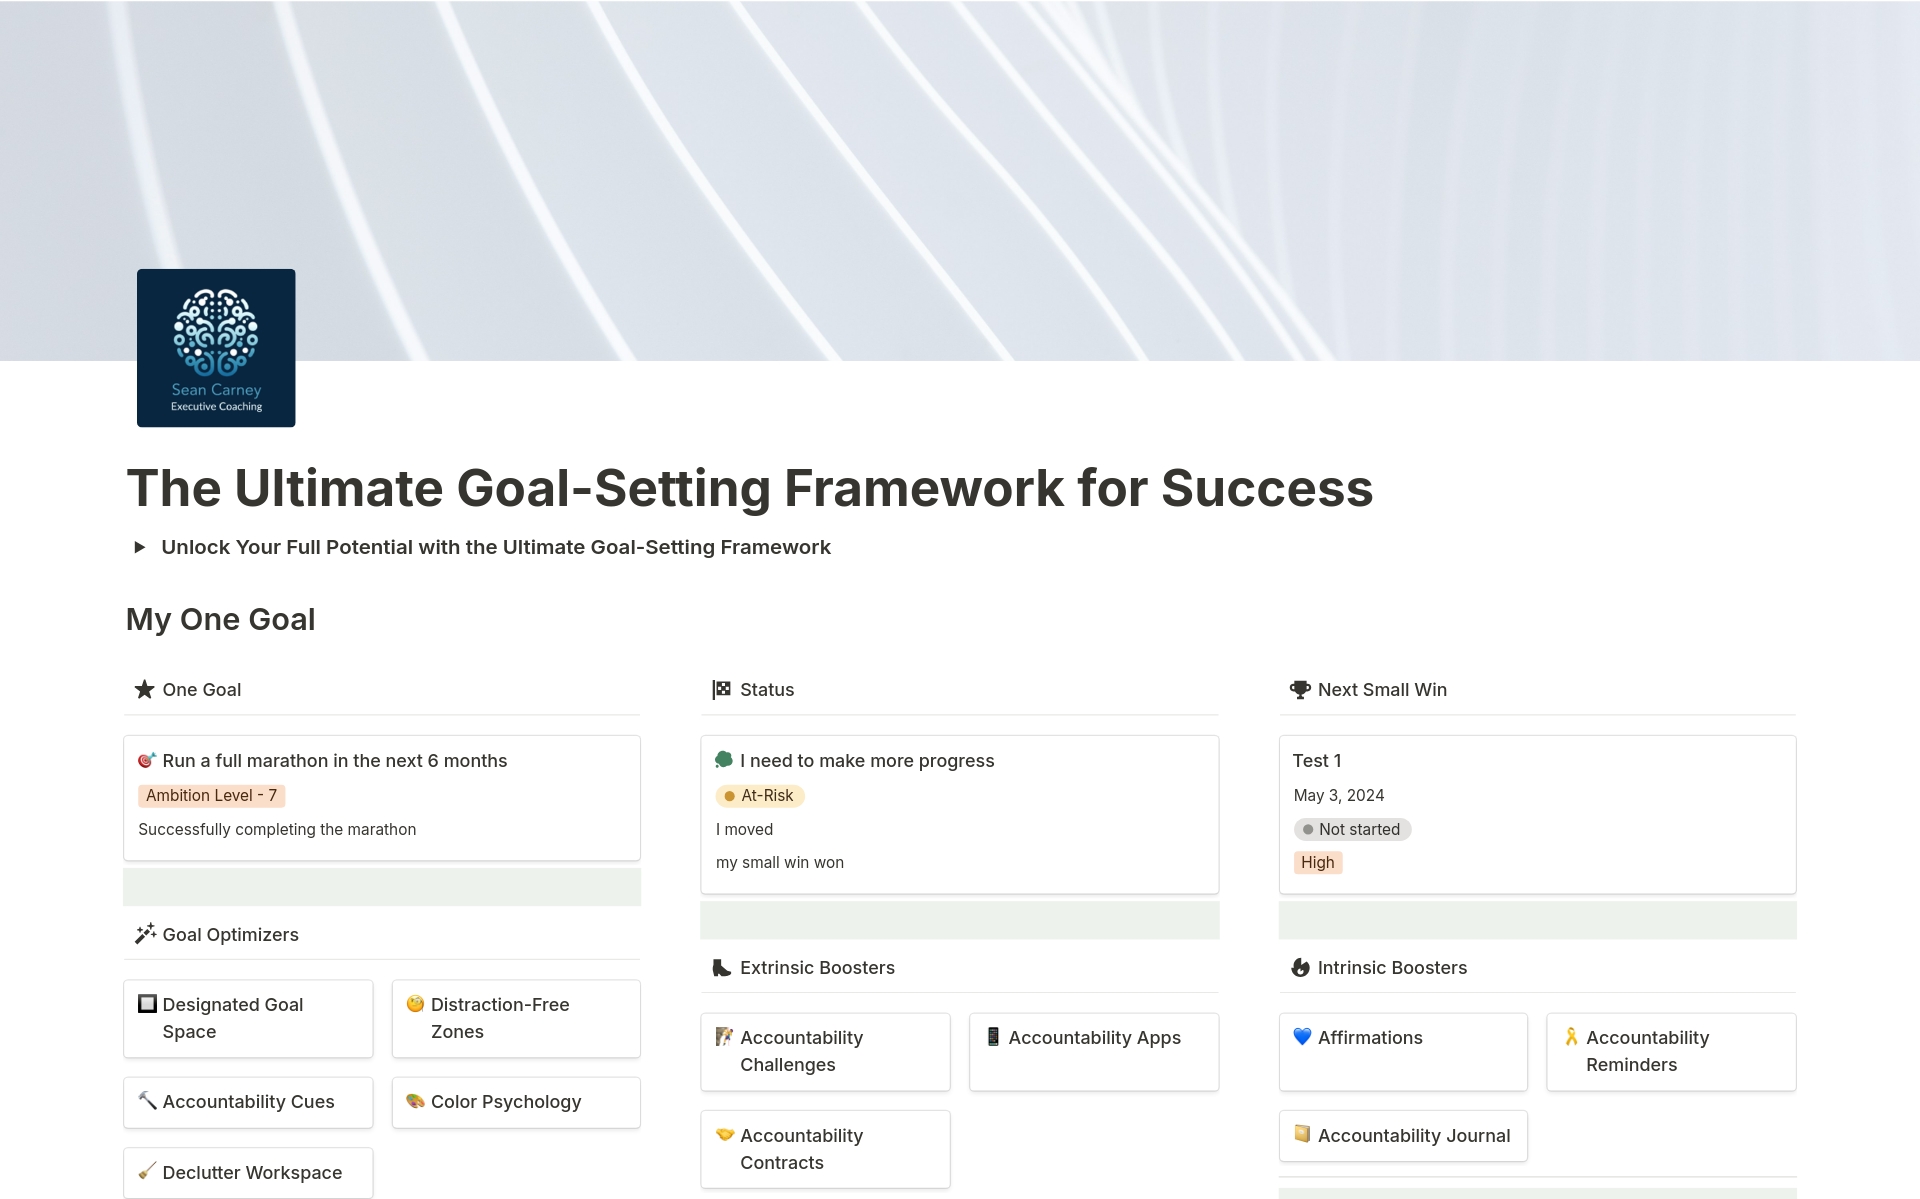 Unlock your potential with 'The Ultimate Goal Setting Framework for Success.' This comprehensive guide provides a roadmap to clarify your aspirations, set achievable goals, and cultivate the habits needed to reach your full potential. 